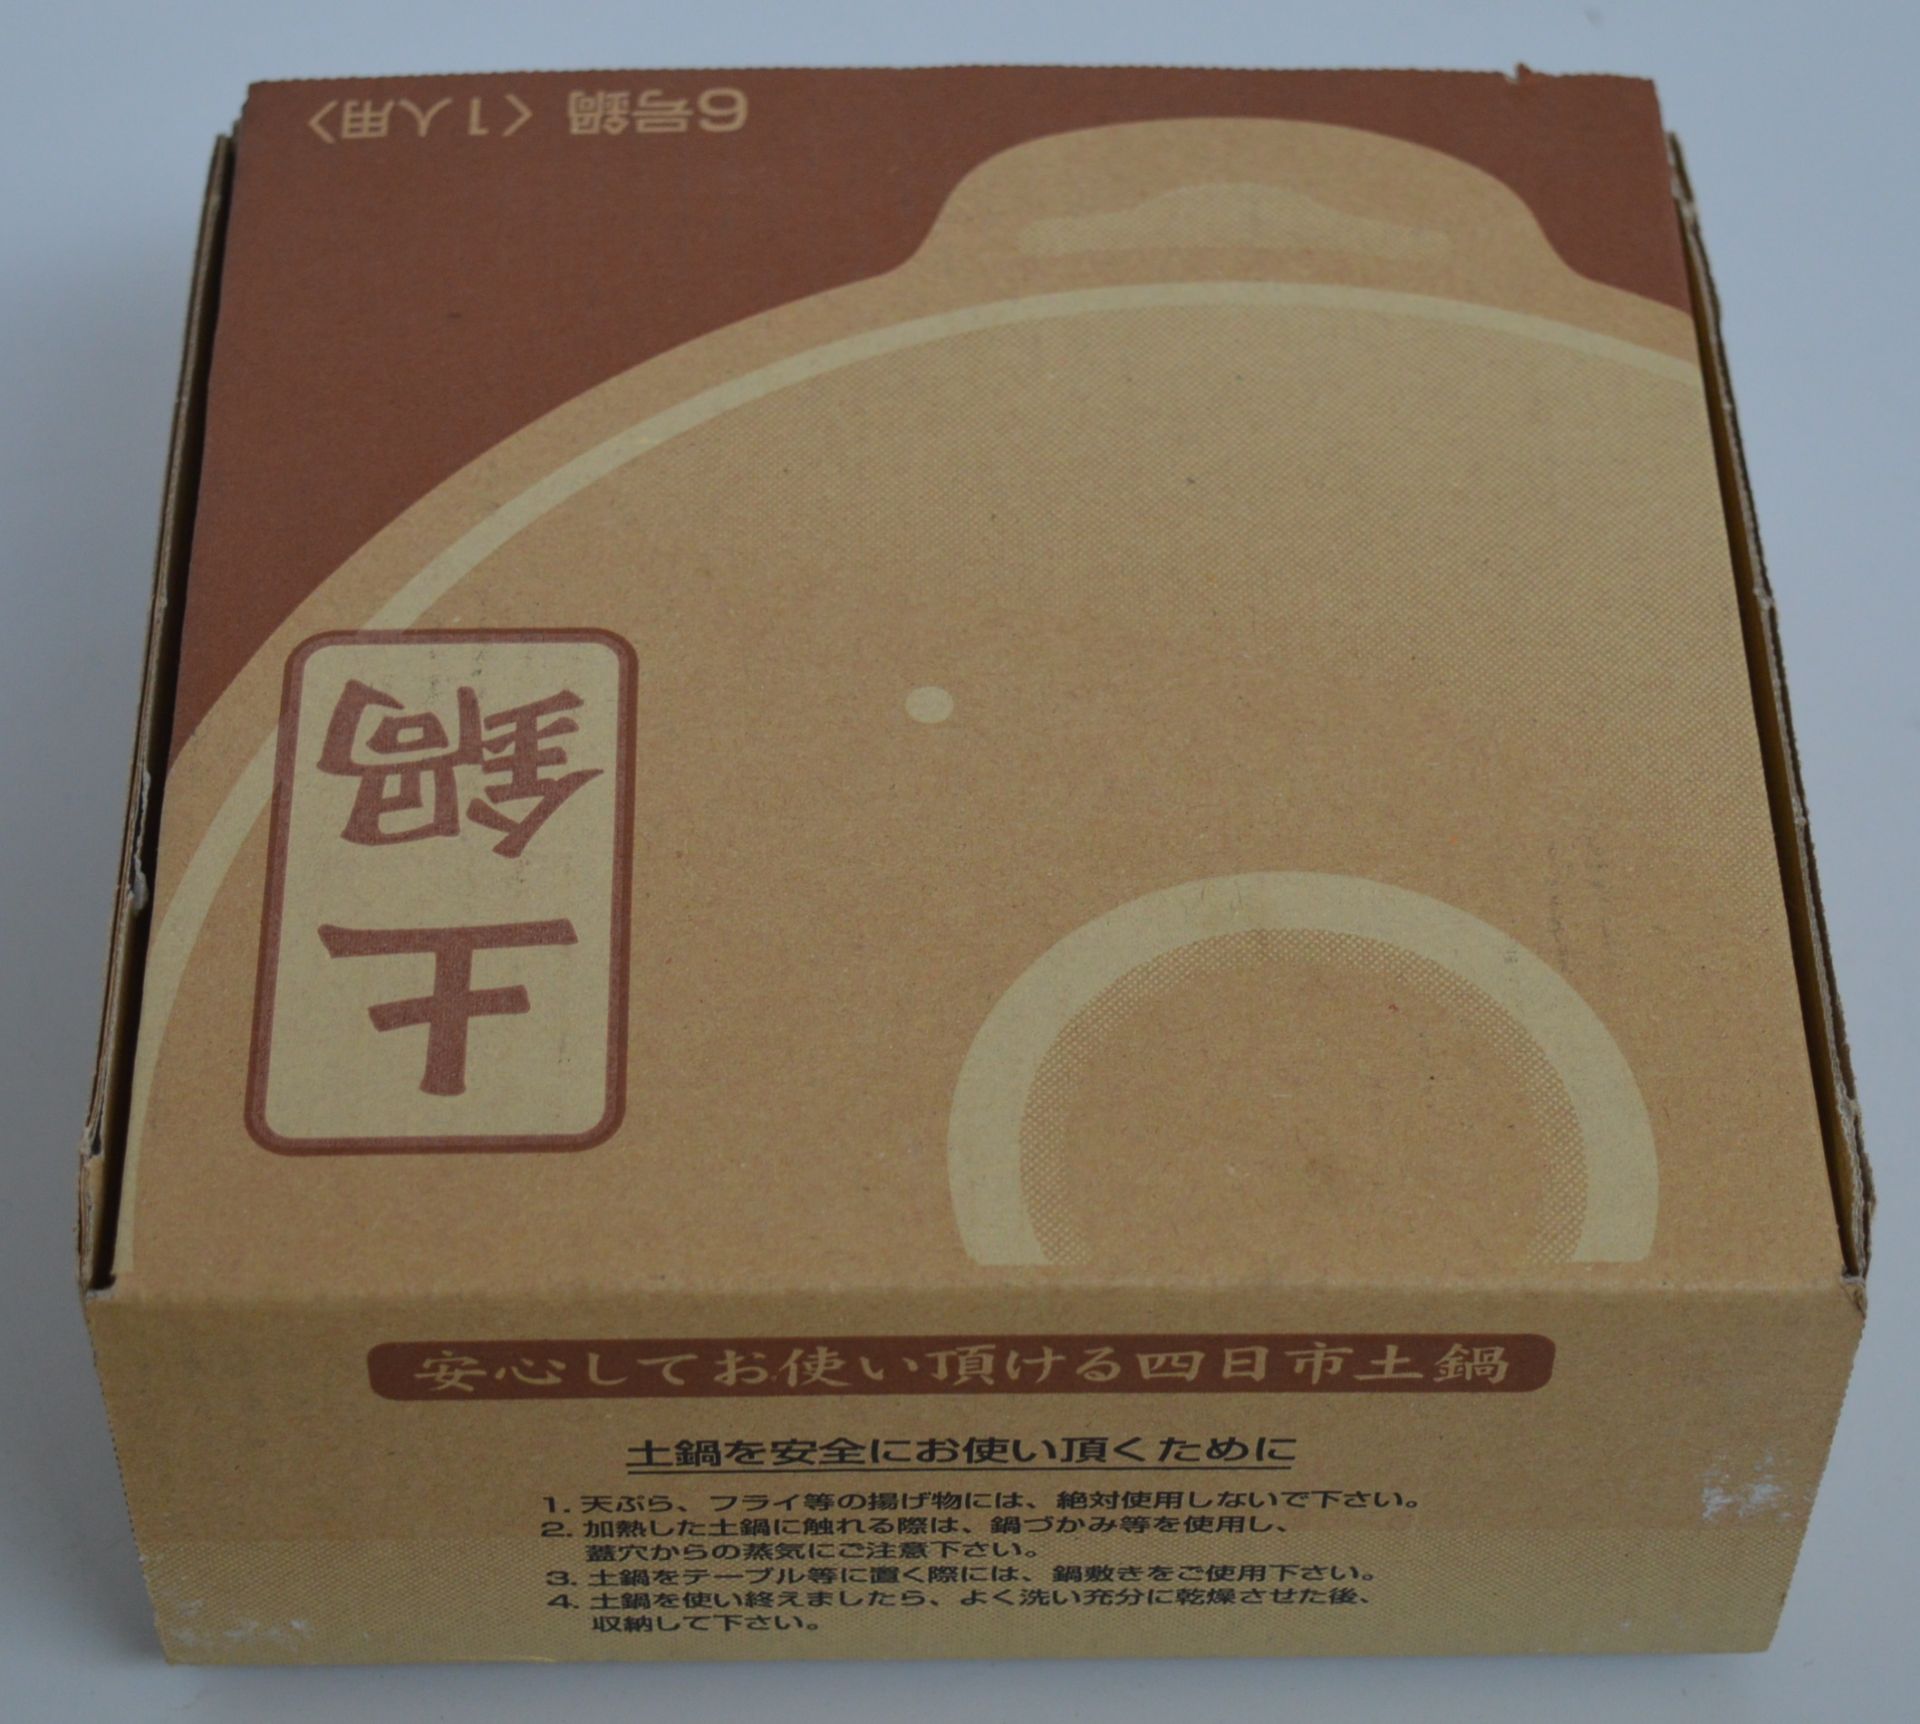 1 x Japanese Donabe Hot Pot - Premium Quality Donabe - CL158 - Boxed With Certificate - Made in - Image 8 of 9